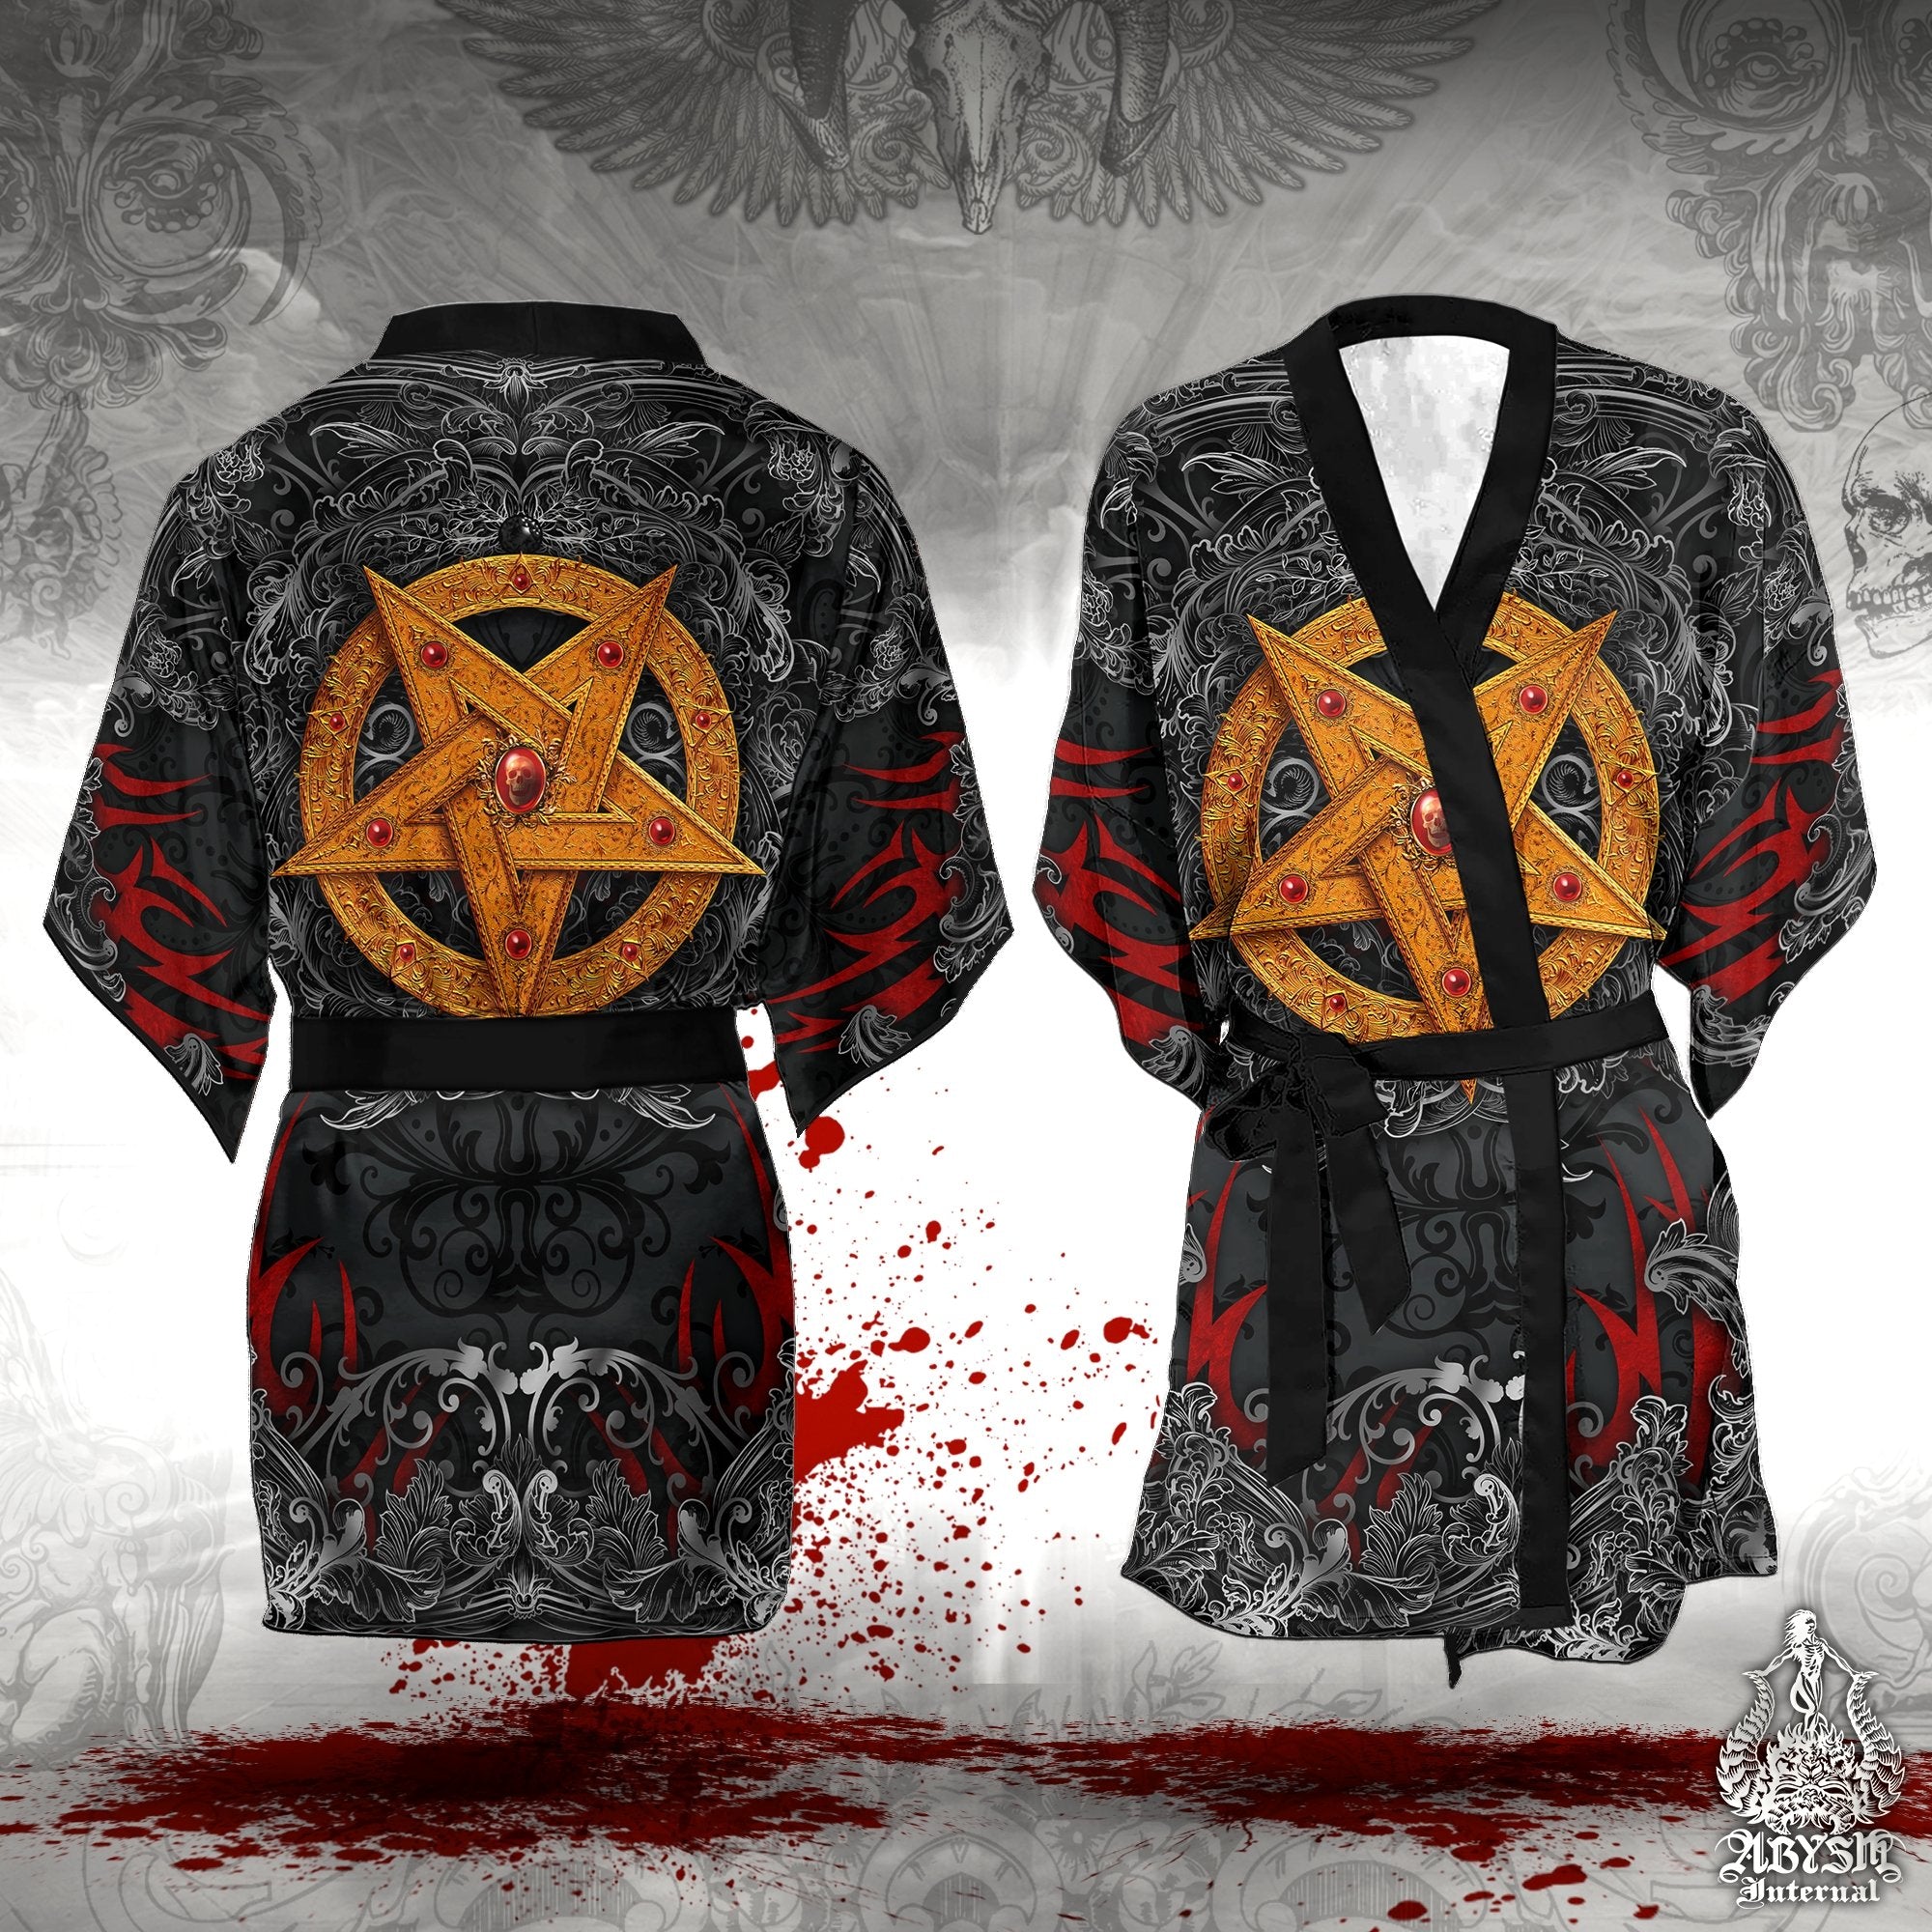 Pentagram Cover Up, Beach Outfit, Party Kimono, Metal Summer Festival Robe, Satanic Gothic Indie and Alternative Clothing, Unisex - Gold Black - Abysm Internal